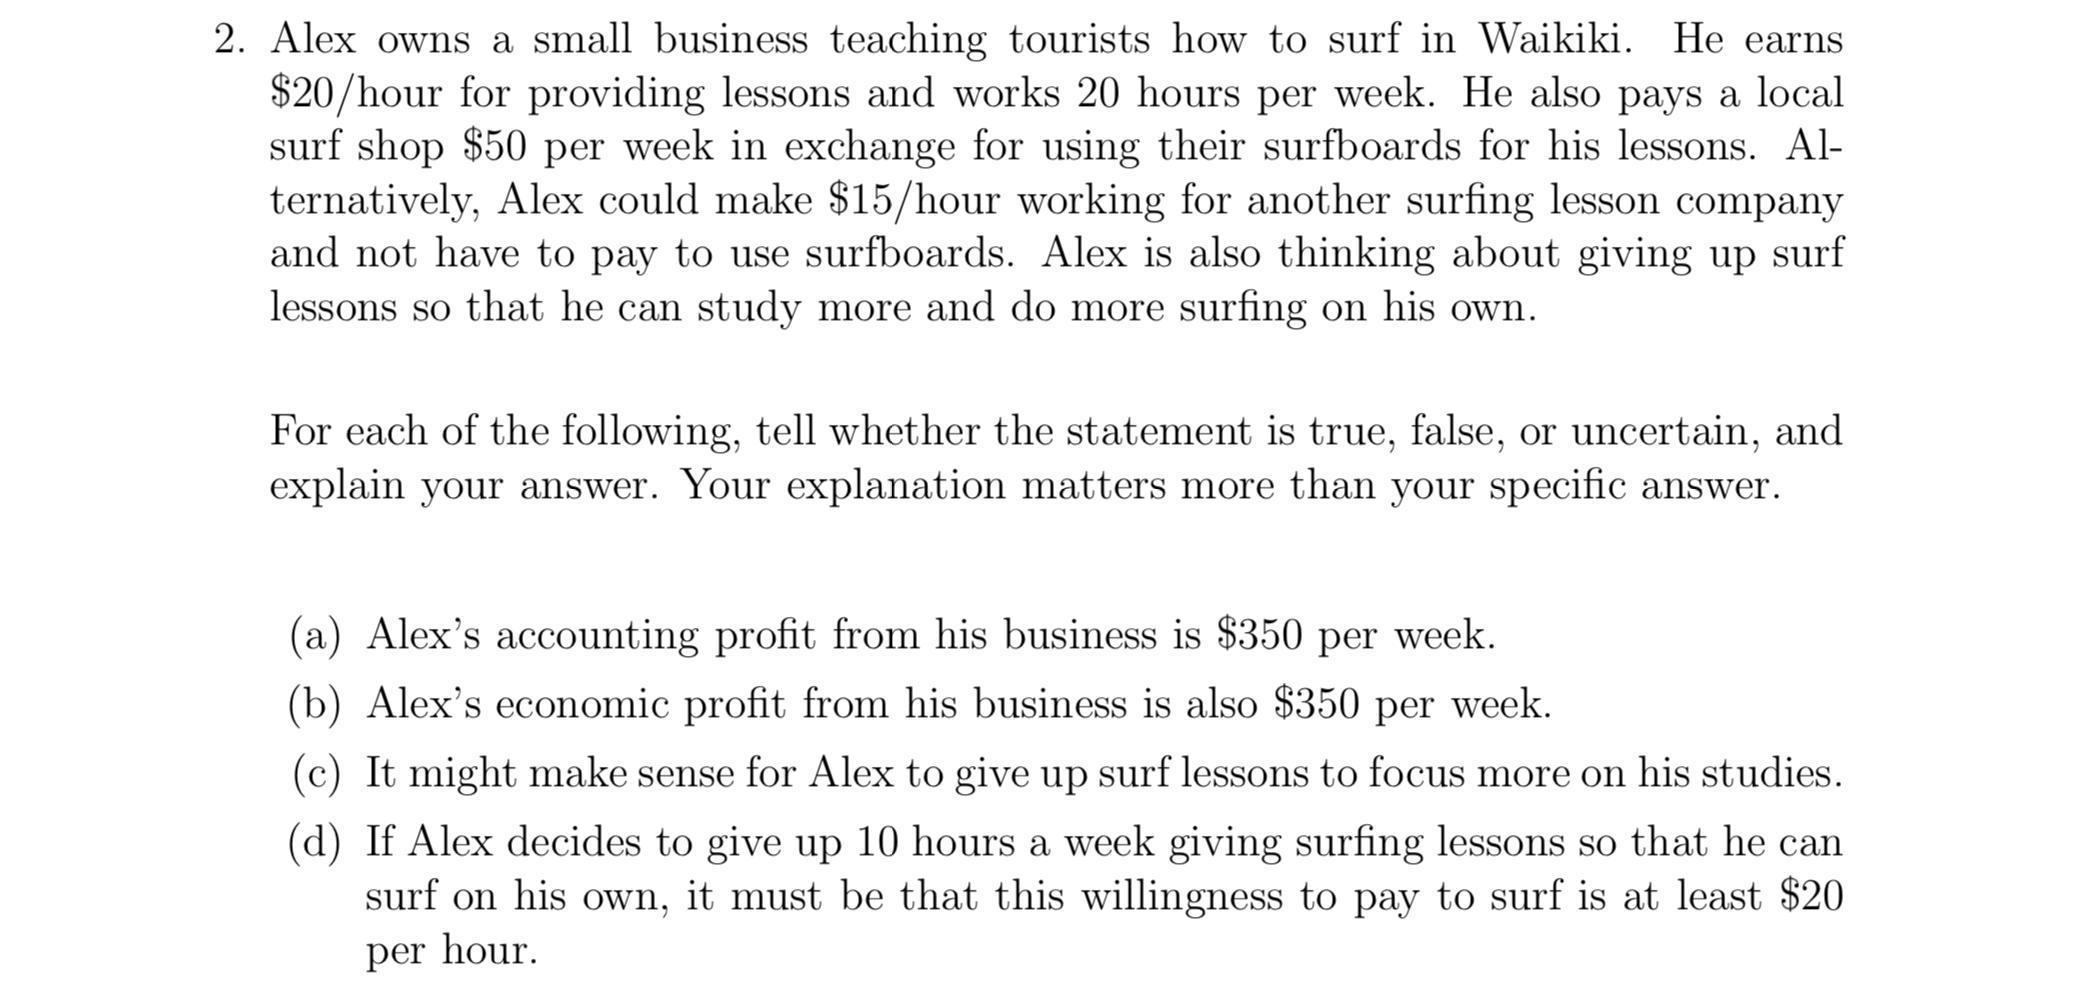 2. Alex owns a small business teaching tourists how to surf in Waikiki. He earns ( $ 20 ) /hour for providing lessons and